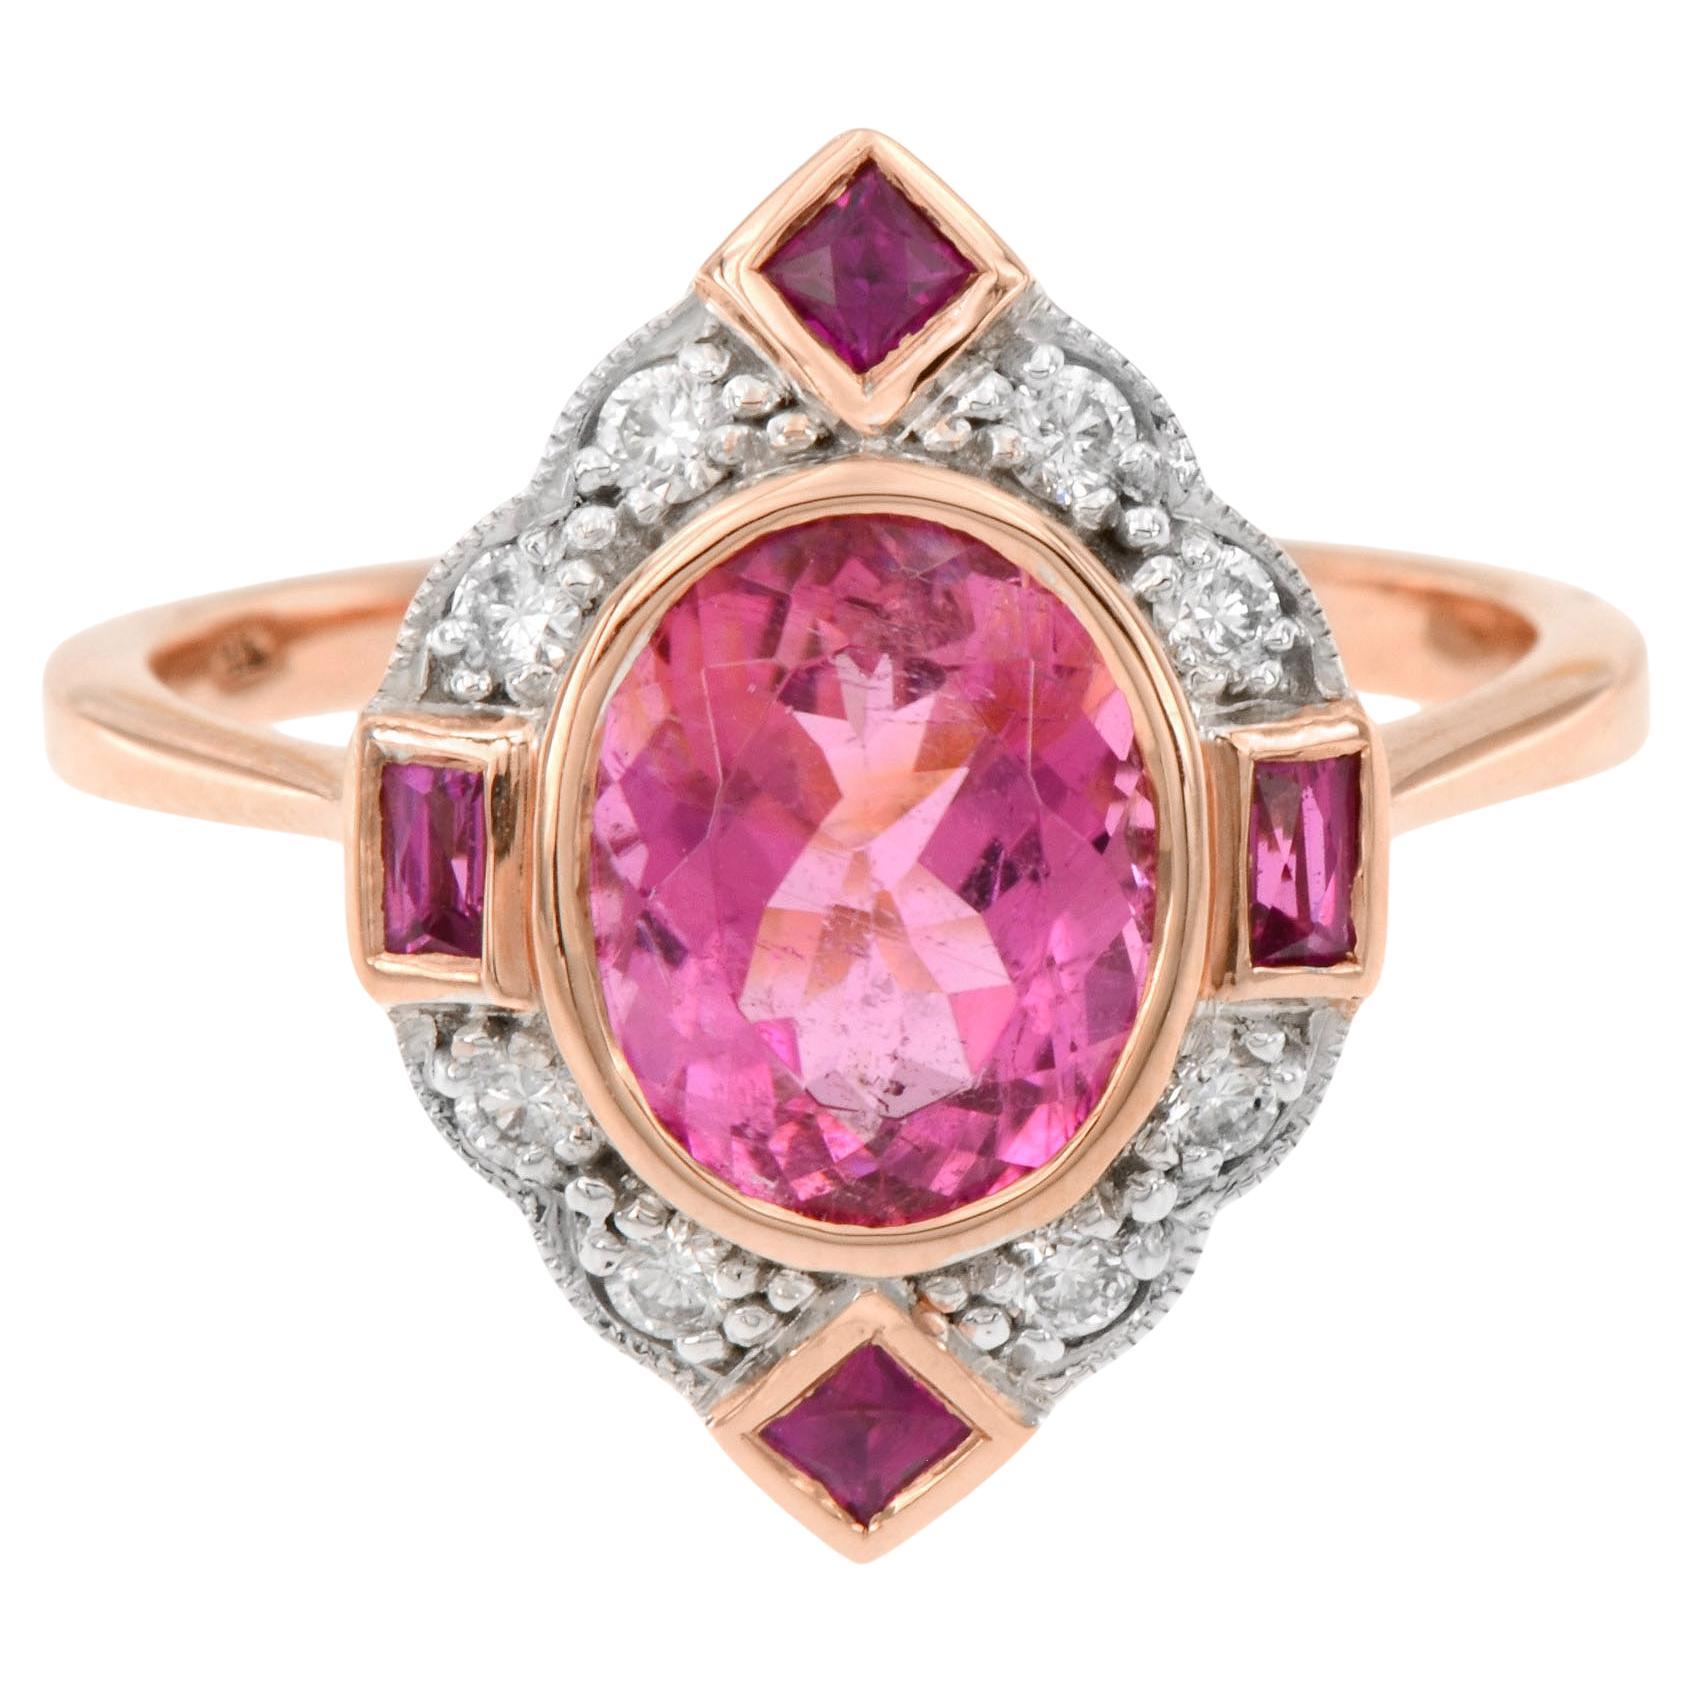 For Sale:  2.20 Ct. Tourmaline Ruby Diamond Vintage Inspired Engagement Ring in 14K Gold